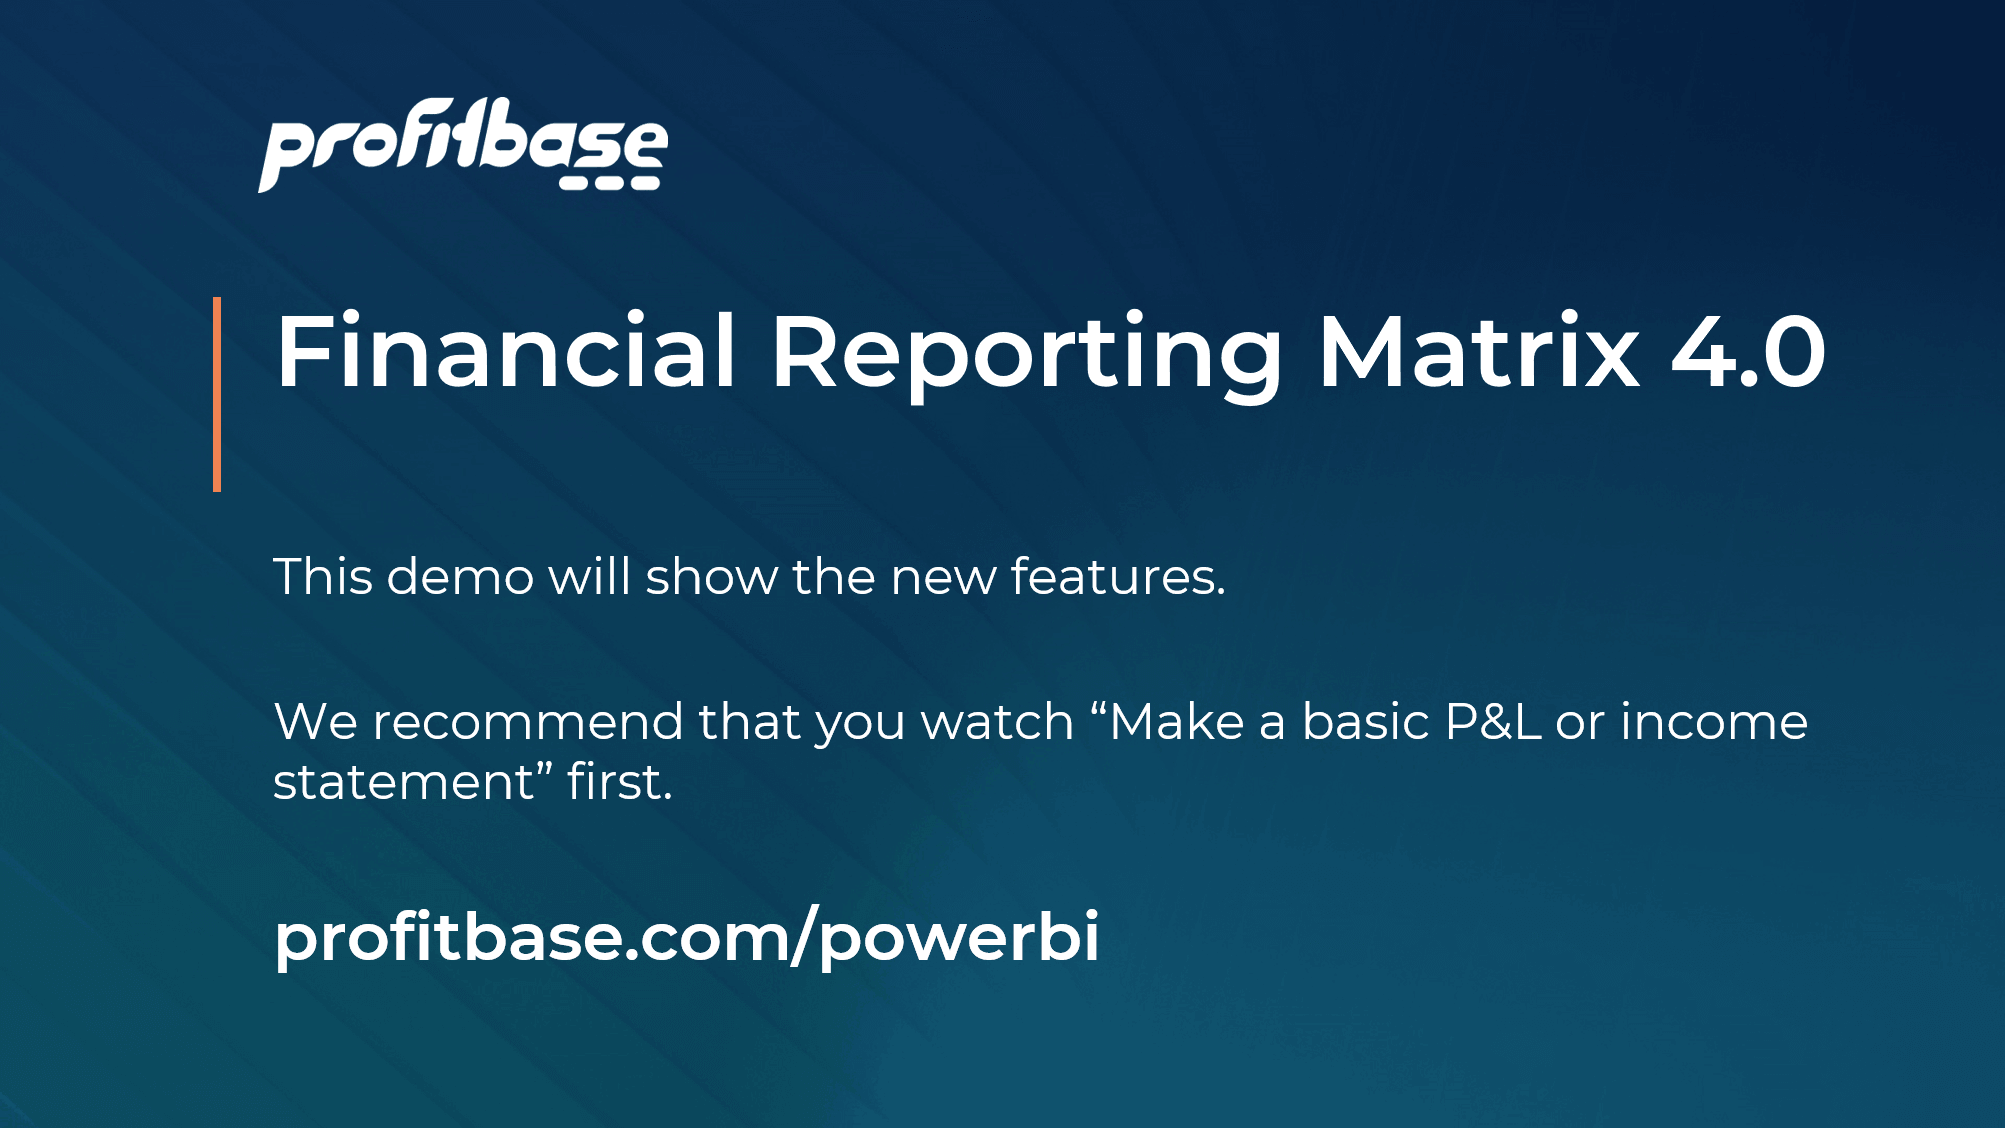 Financial Reporting Matrix V4 for Power BI demo – new features